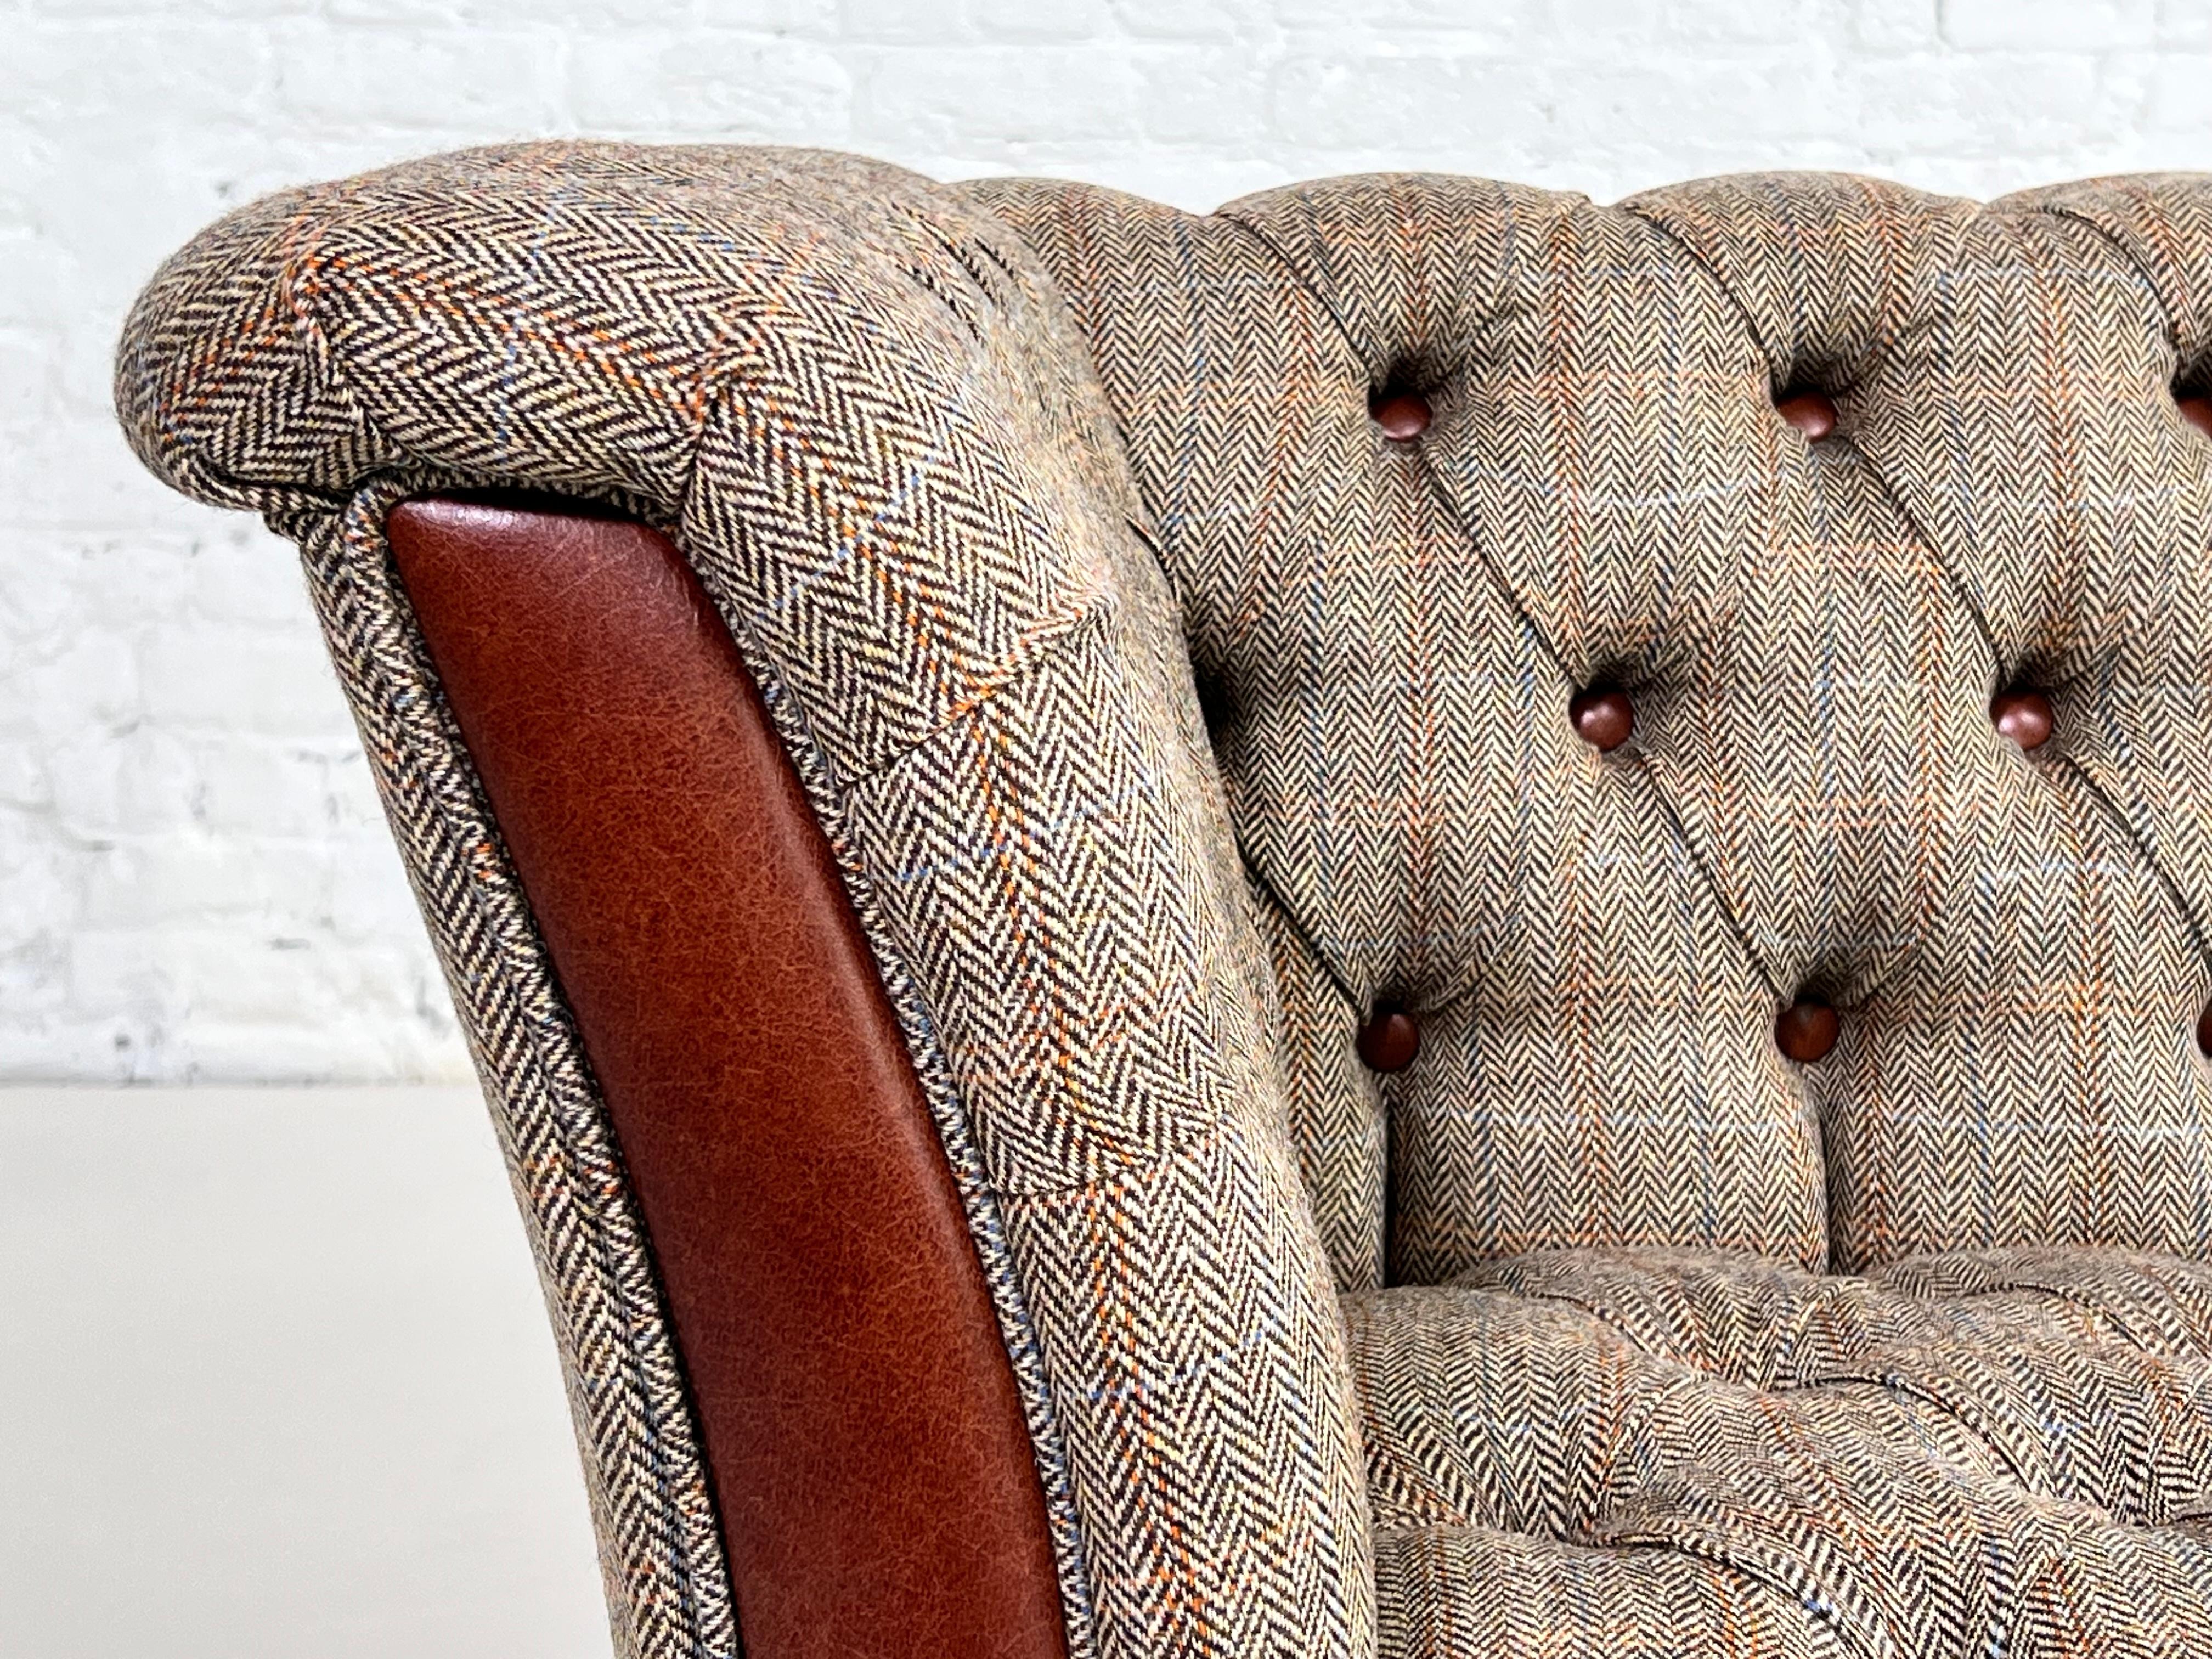 European Wool Tweed Fabric with Leather Finishes and Wood Chesterfield Sofa For Sale